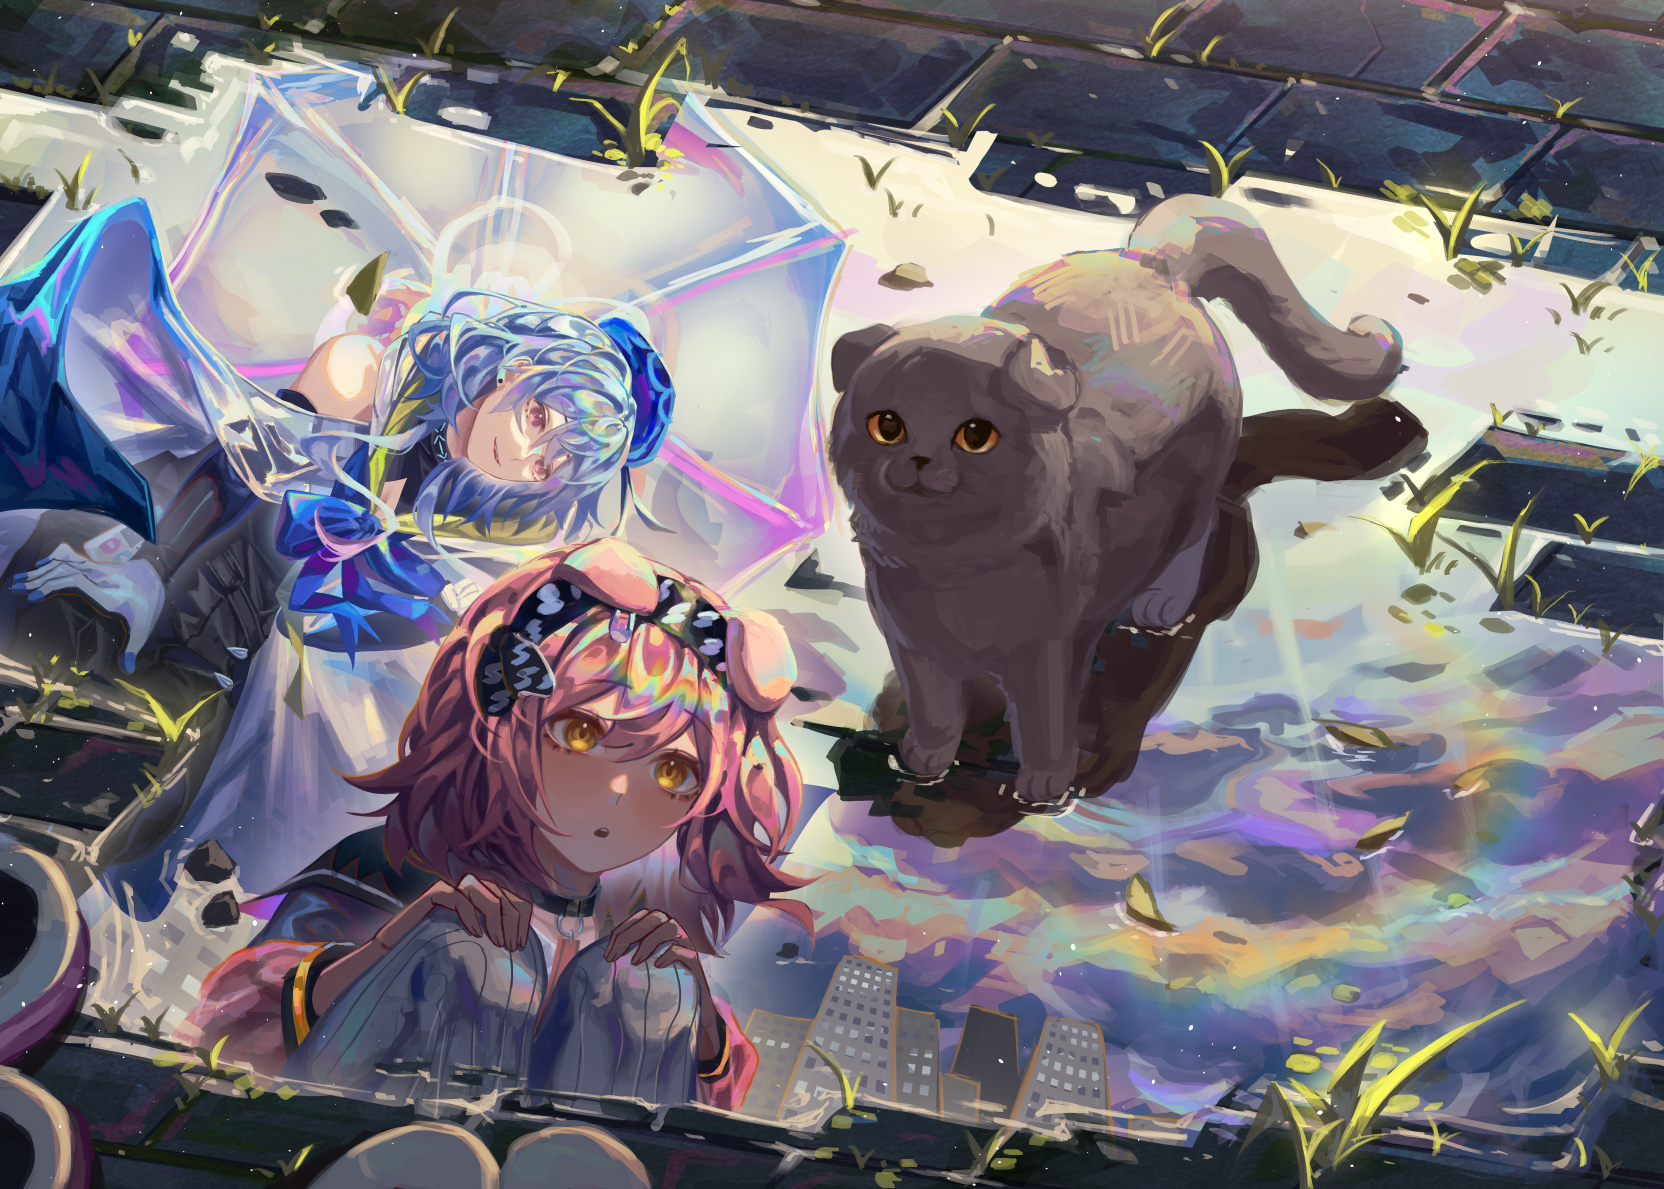 Anime Pixiv Anime Girls Umbrella Animal Ears Cats Animals Leaves Water Reflection Puddle 1664x1189